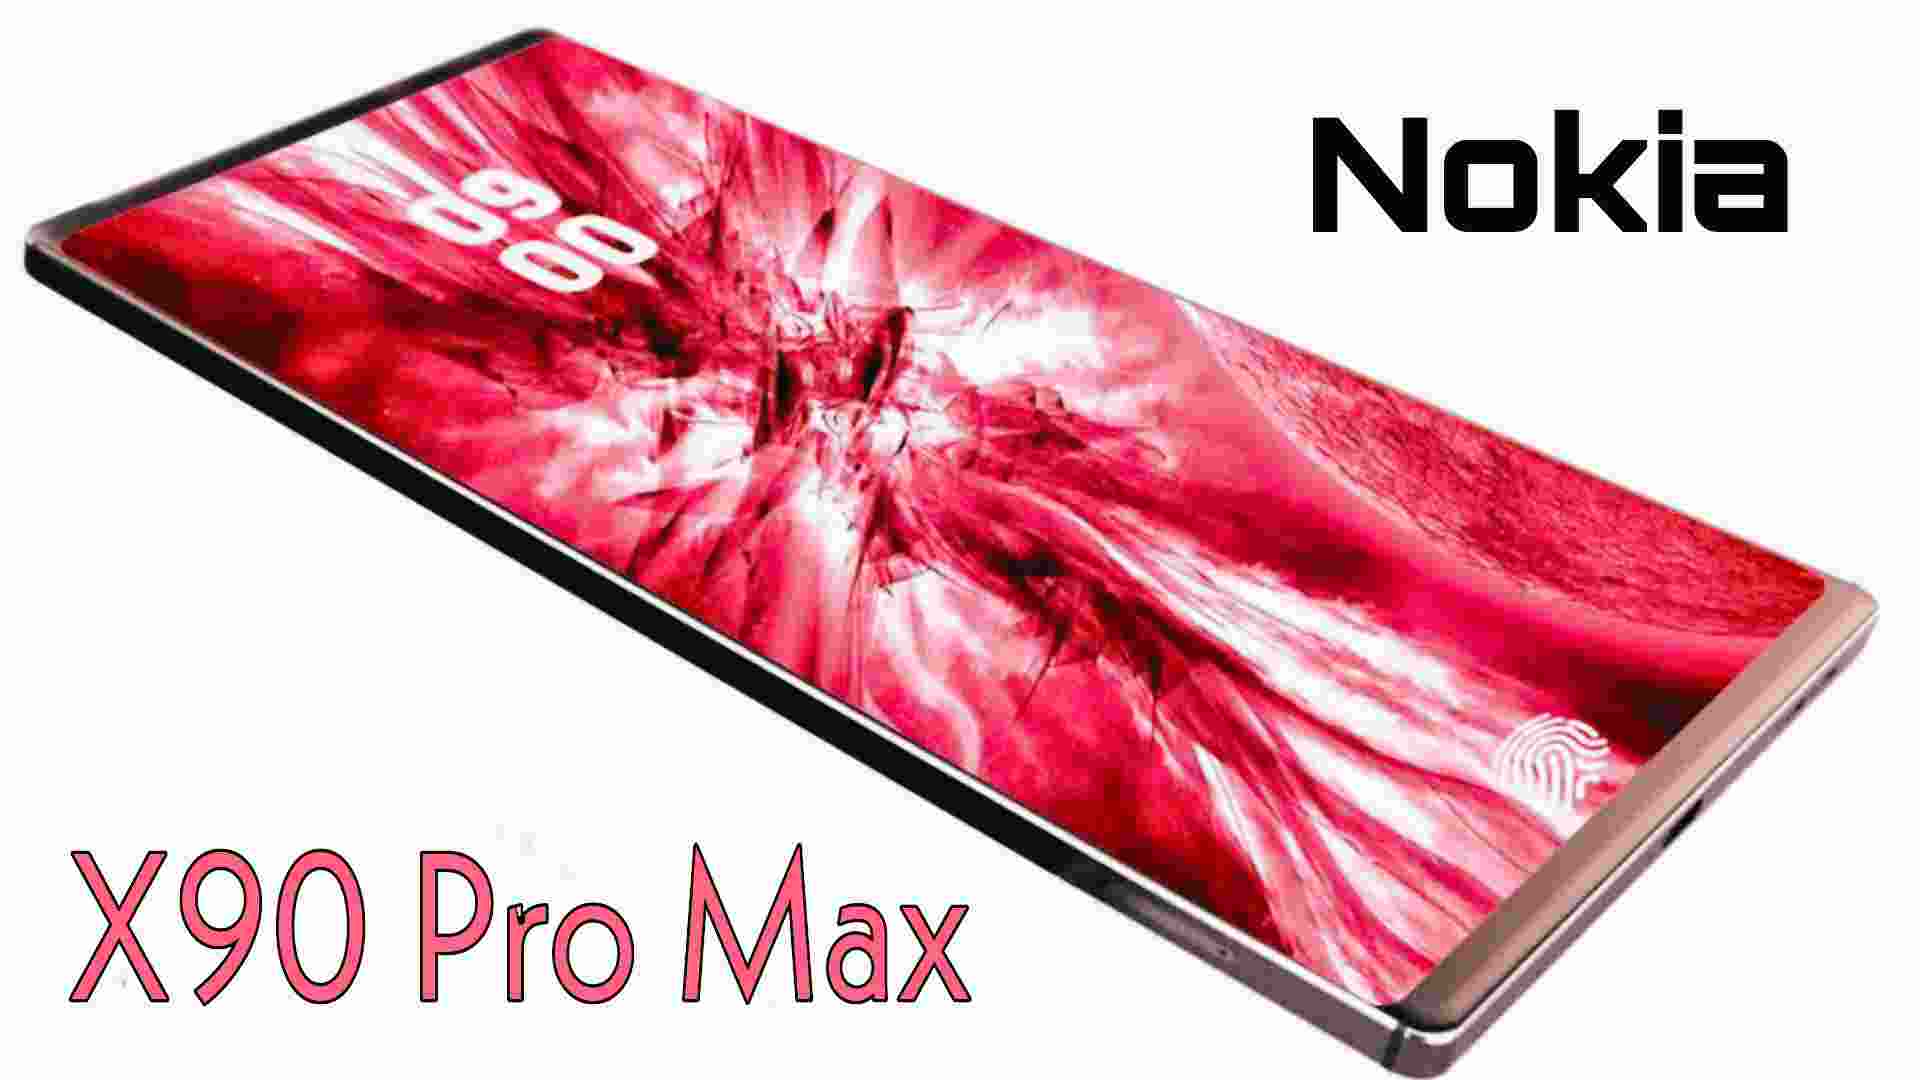 Nokia X90 Pro Max - Price, Full Specifications with Release Date, News and Reviews.